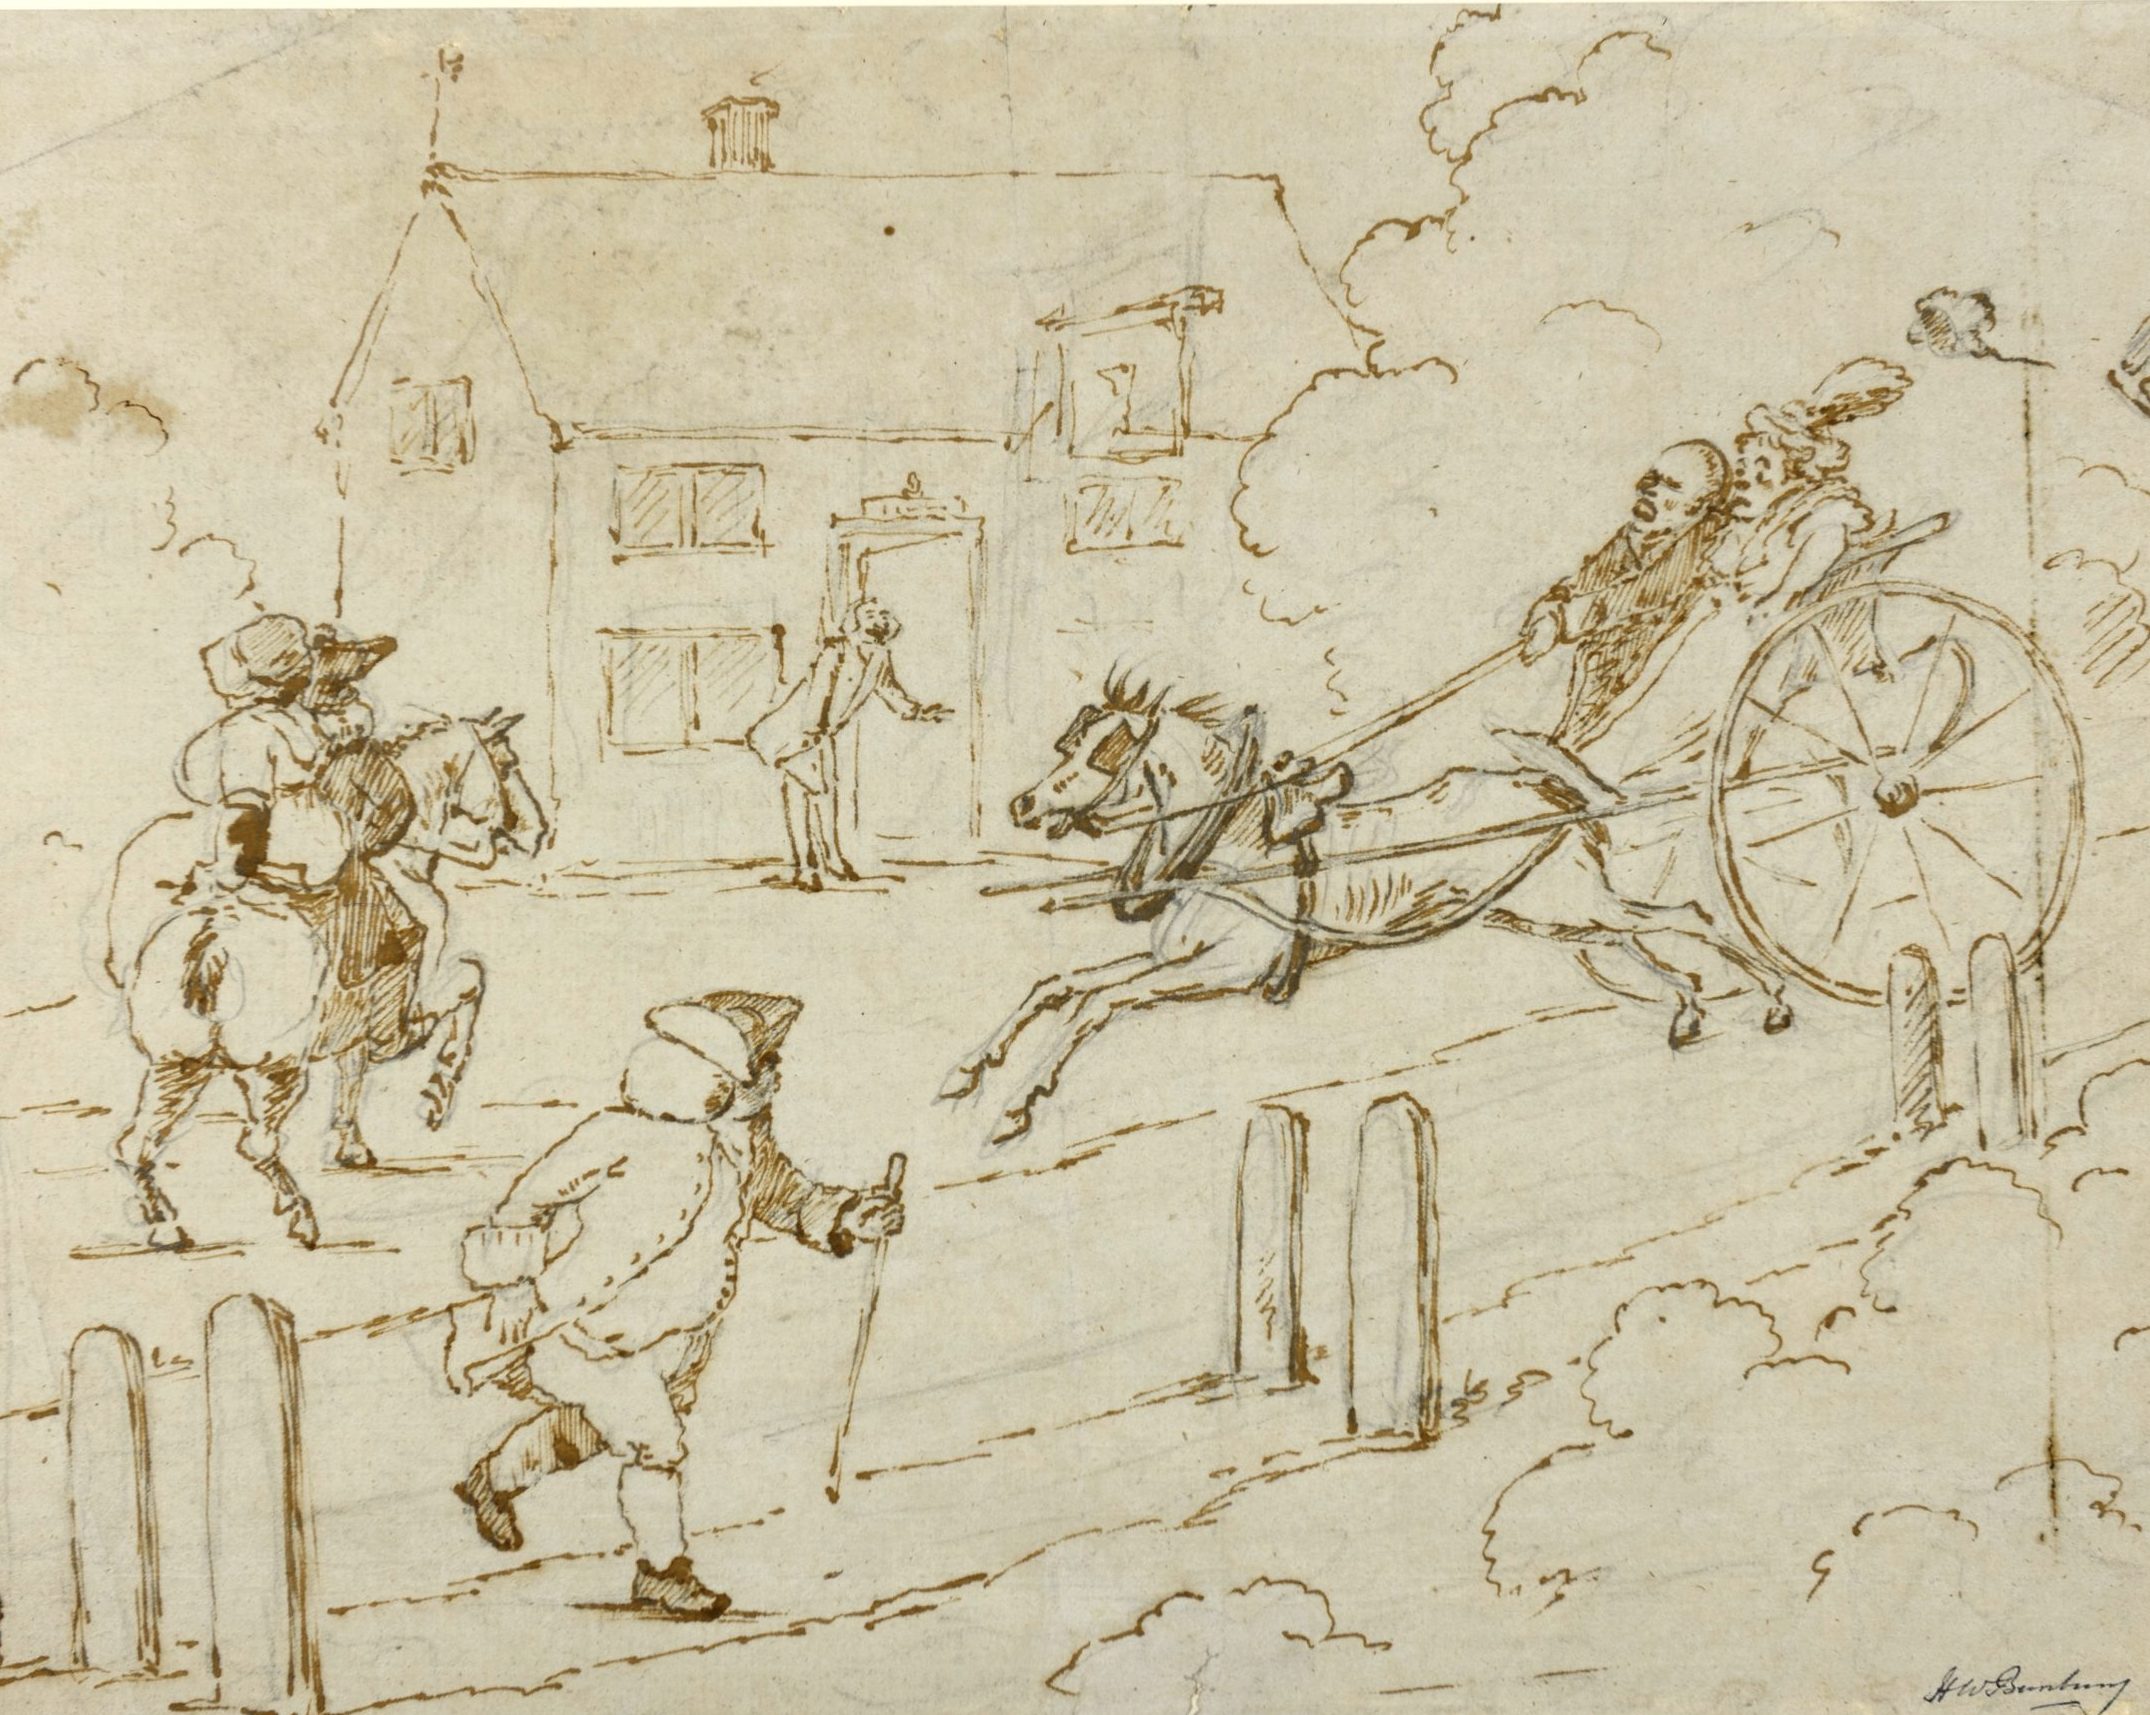 An ink drawing by Henry William Bunbury. It depicts a person on a horse jumping over a fence a person watching and a large house in the background.